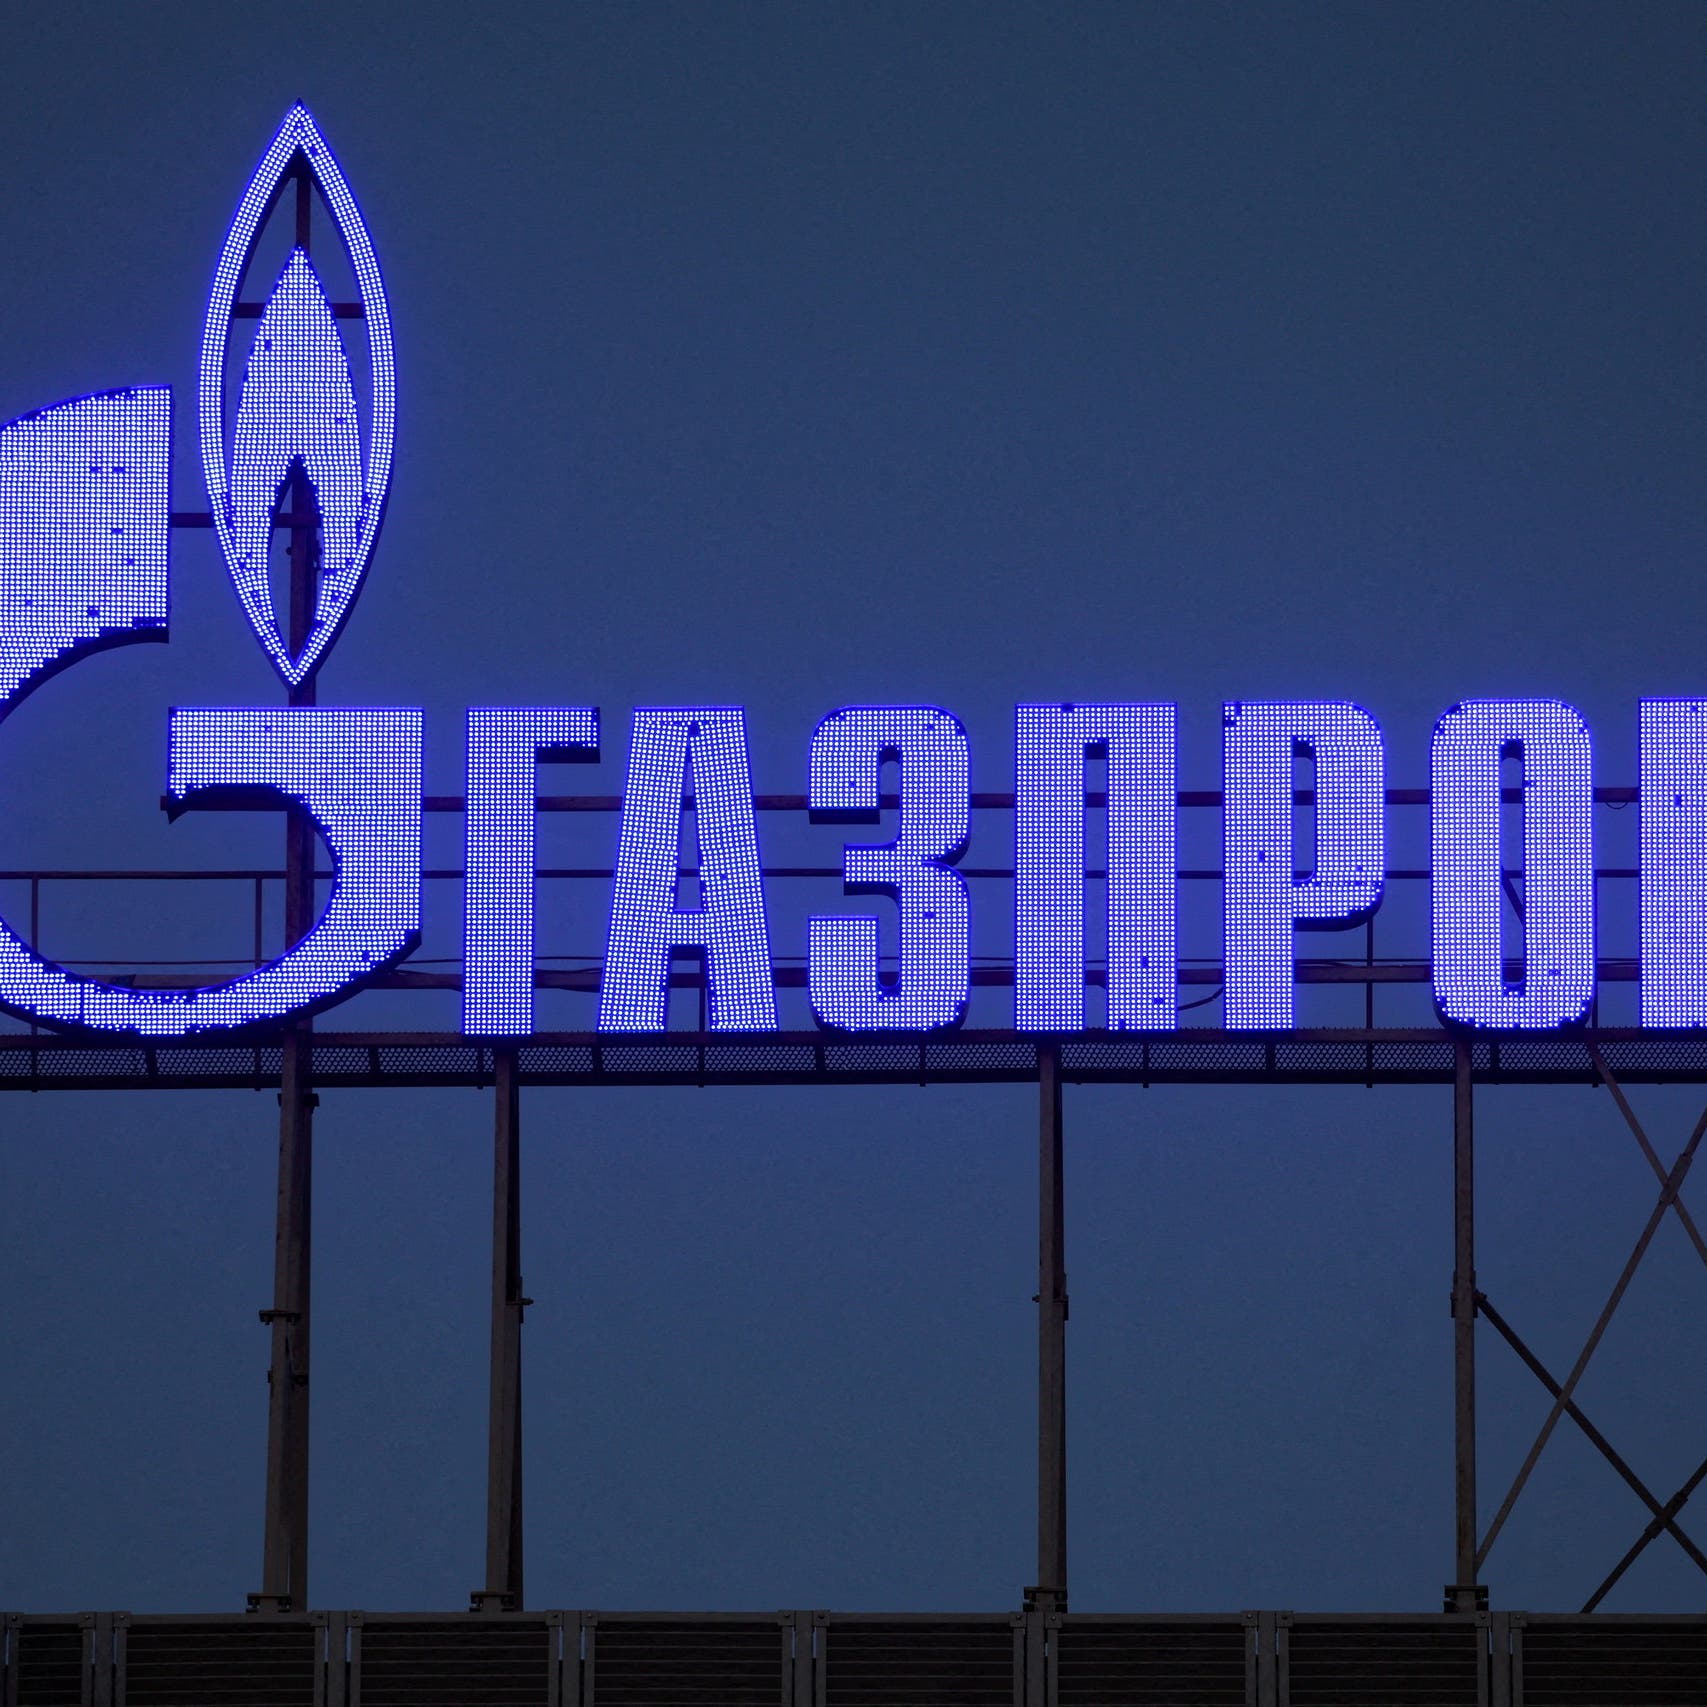 Russia’s Gazprom halts gas supplies to Bulgaria, Poland for failing to pay in rubles